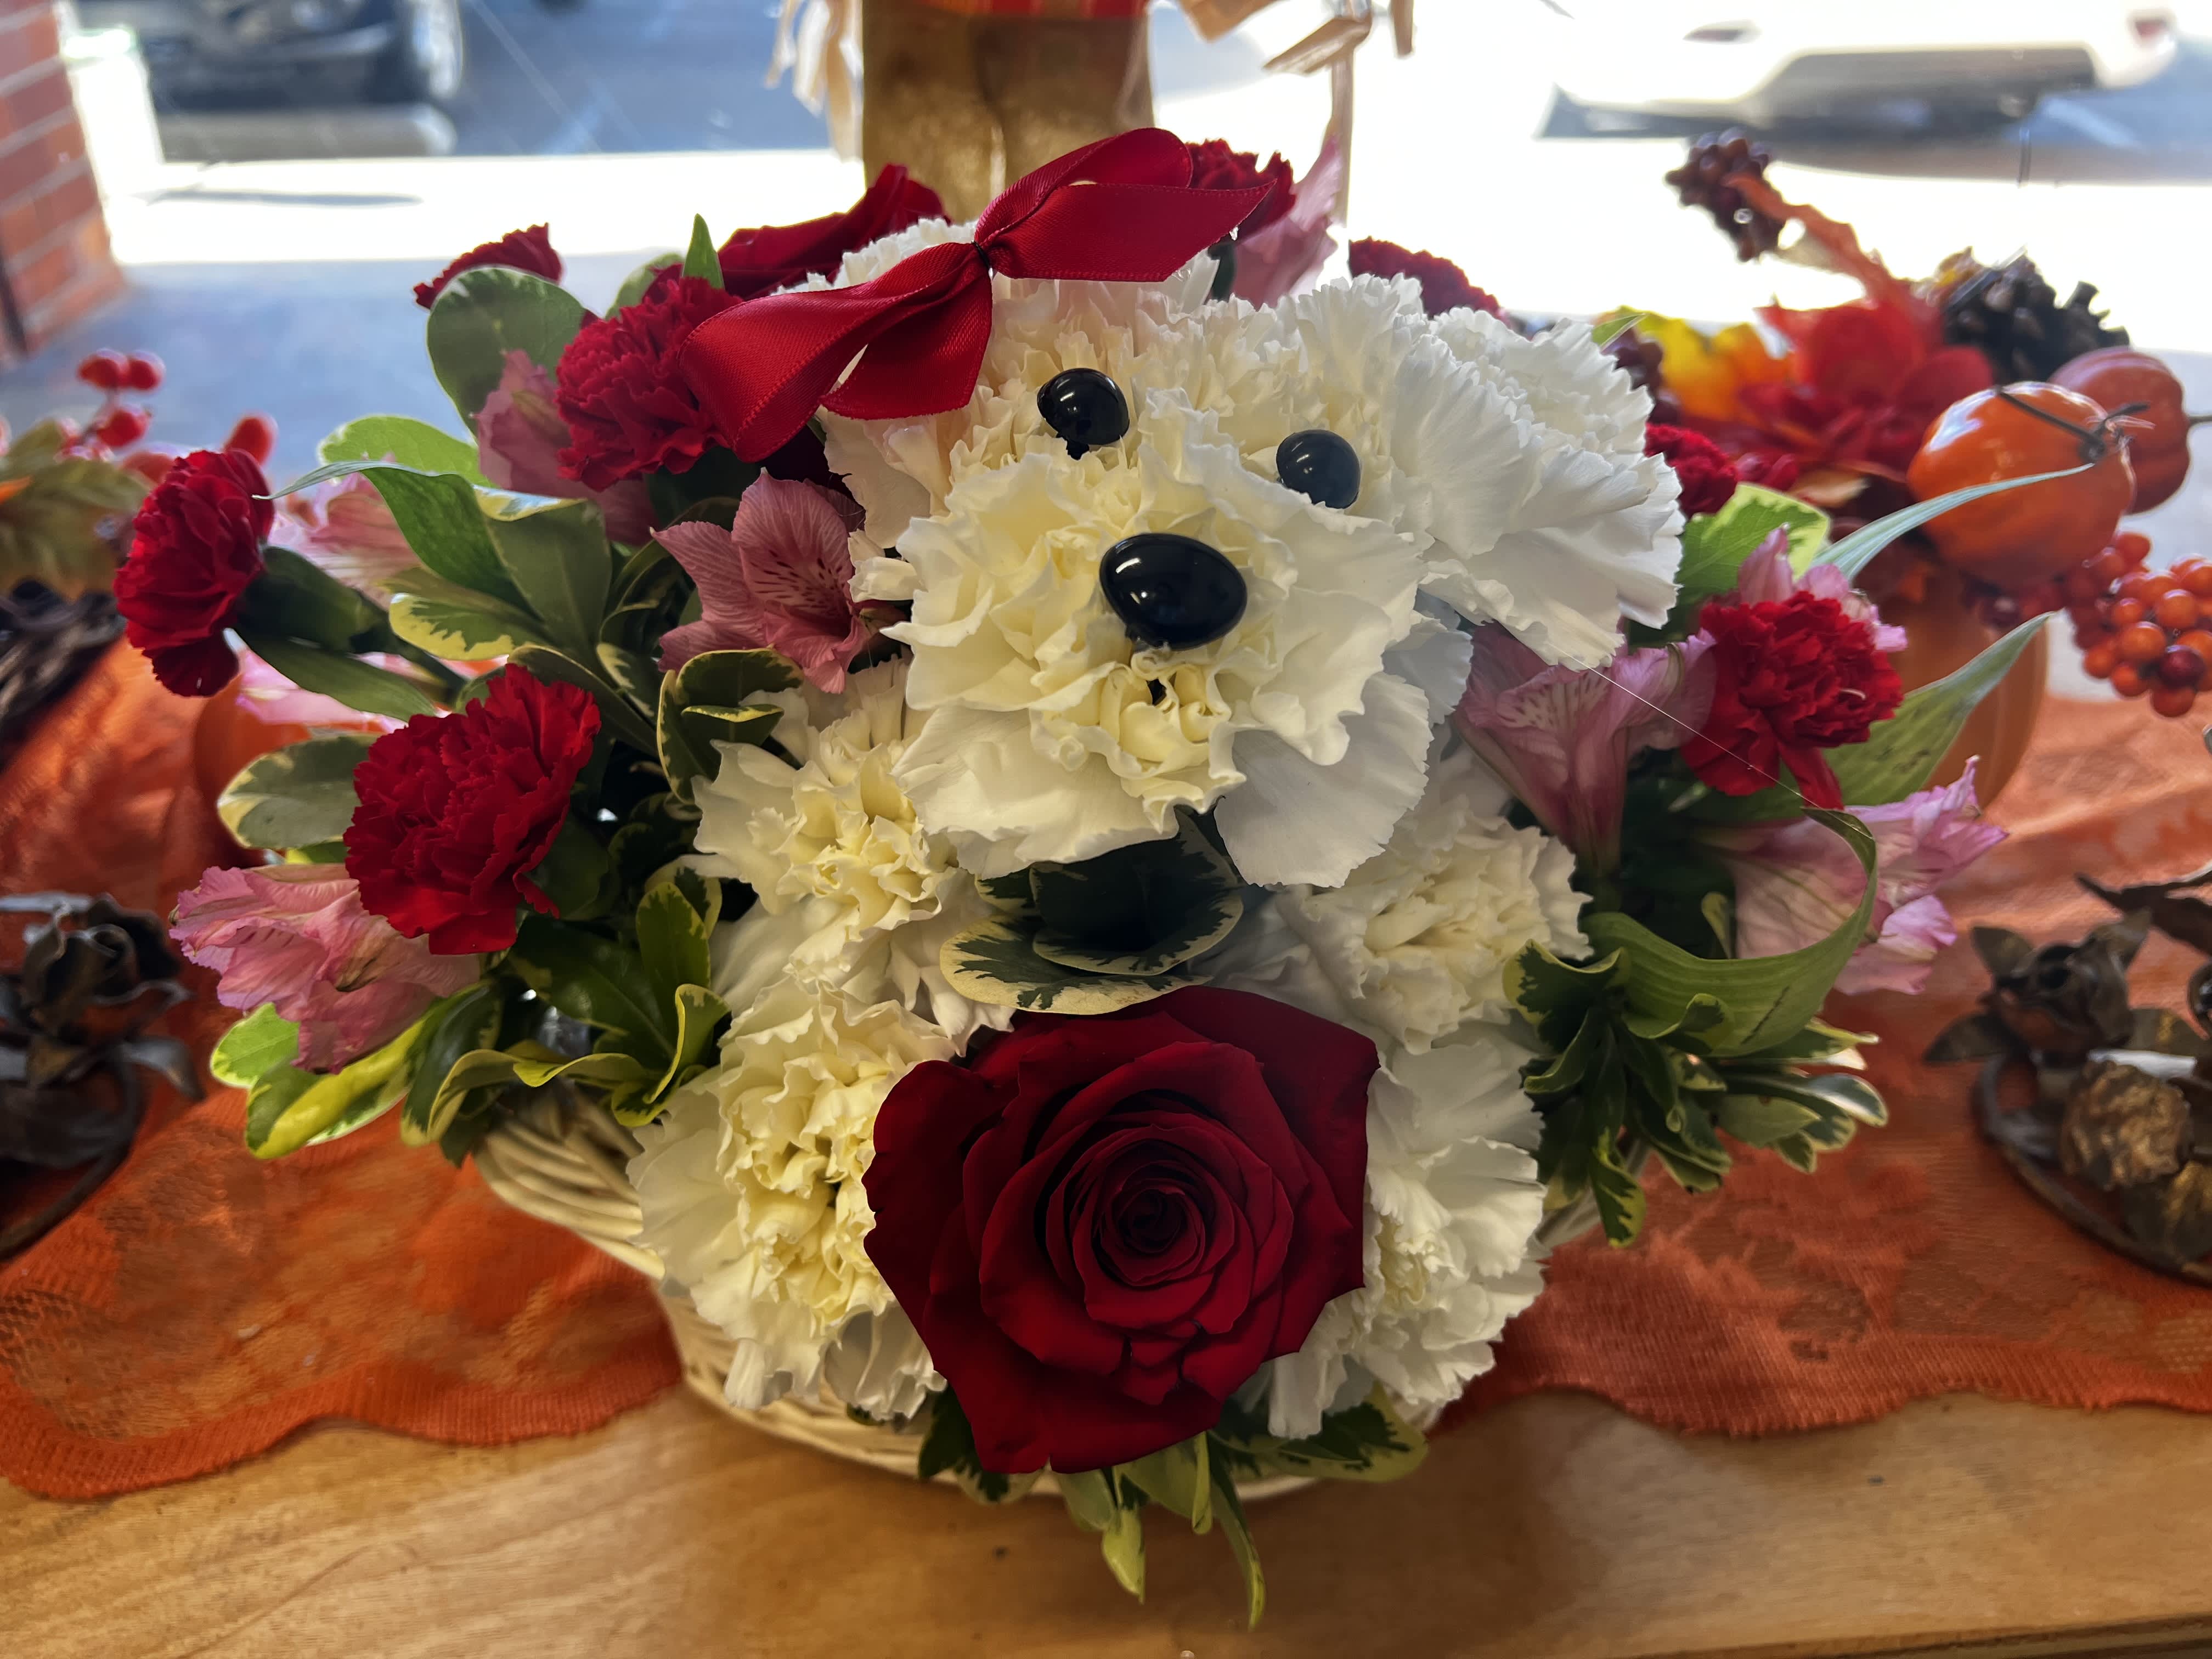 Puppy Love - A cute Puppy with White carnations and a red rose.